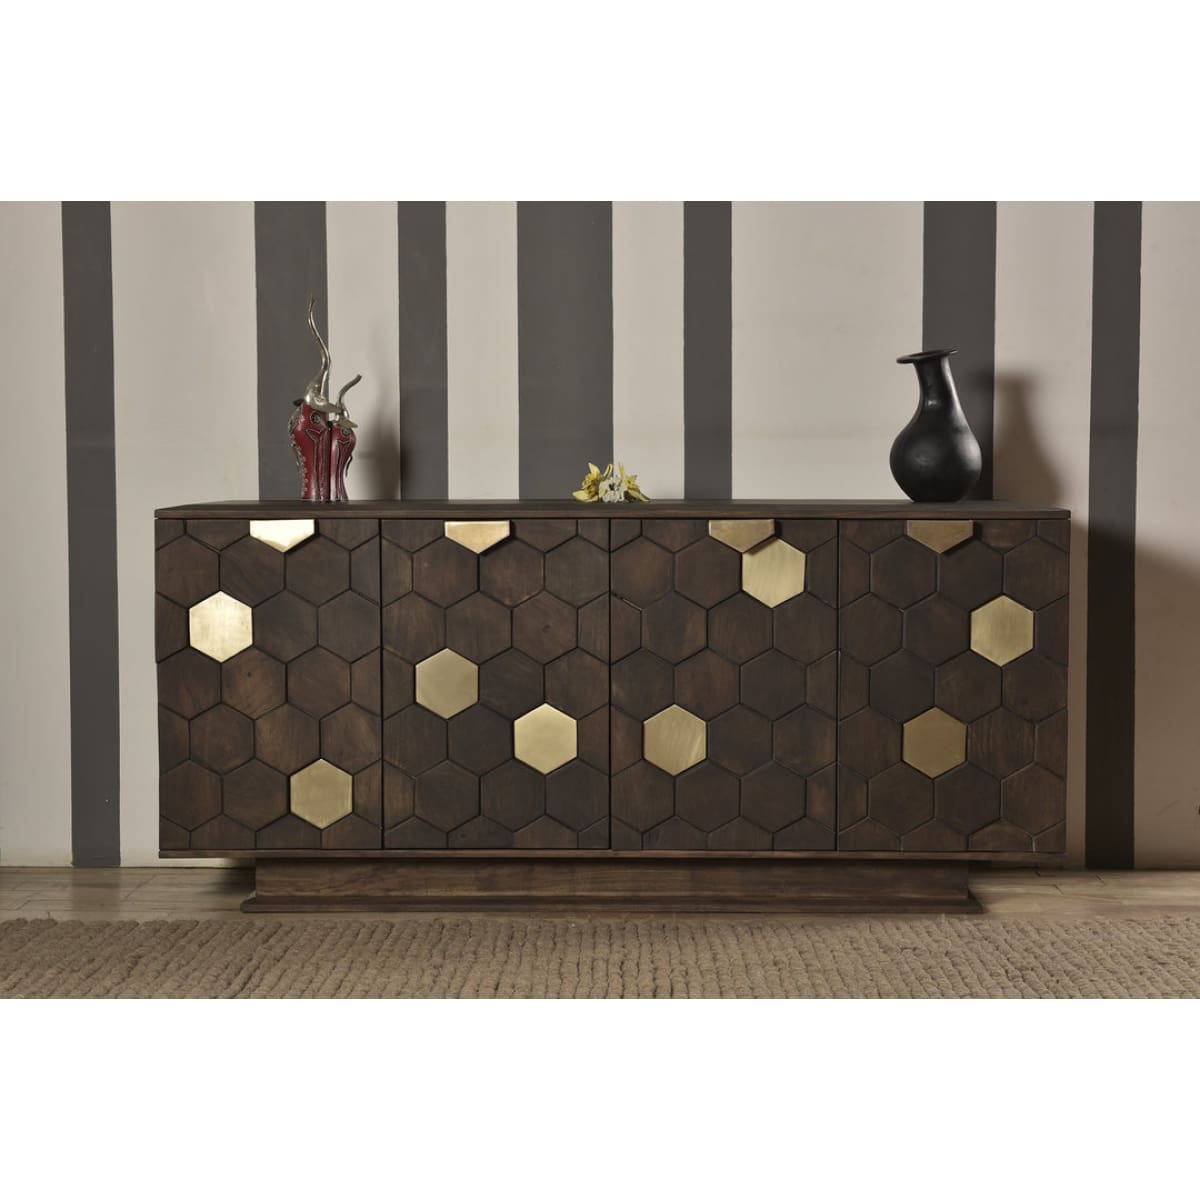 Bailey Sideboard - Cocoa Brown - lh-import-sideboards-cabinets